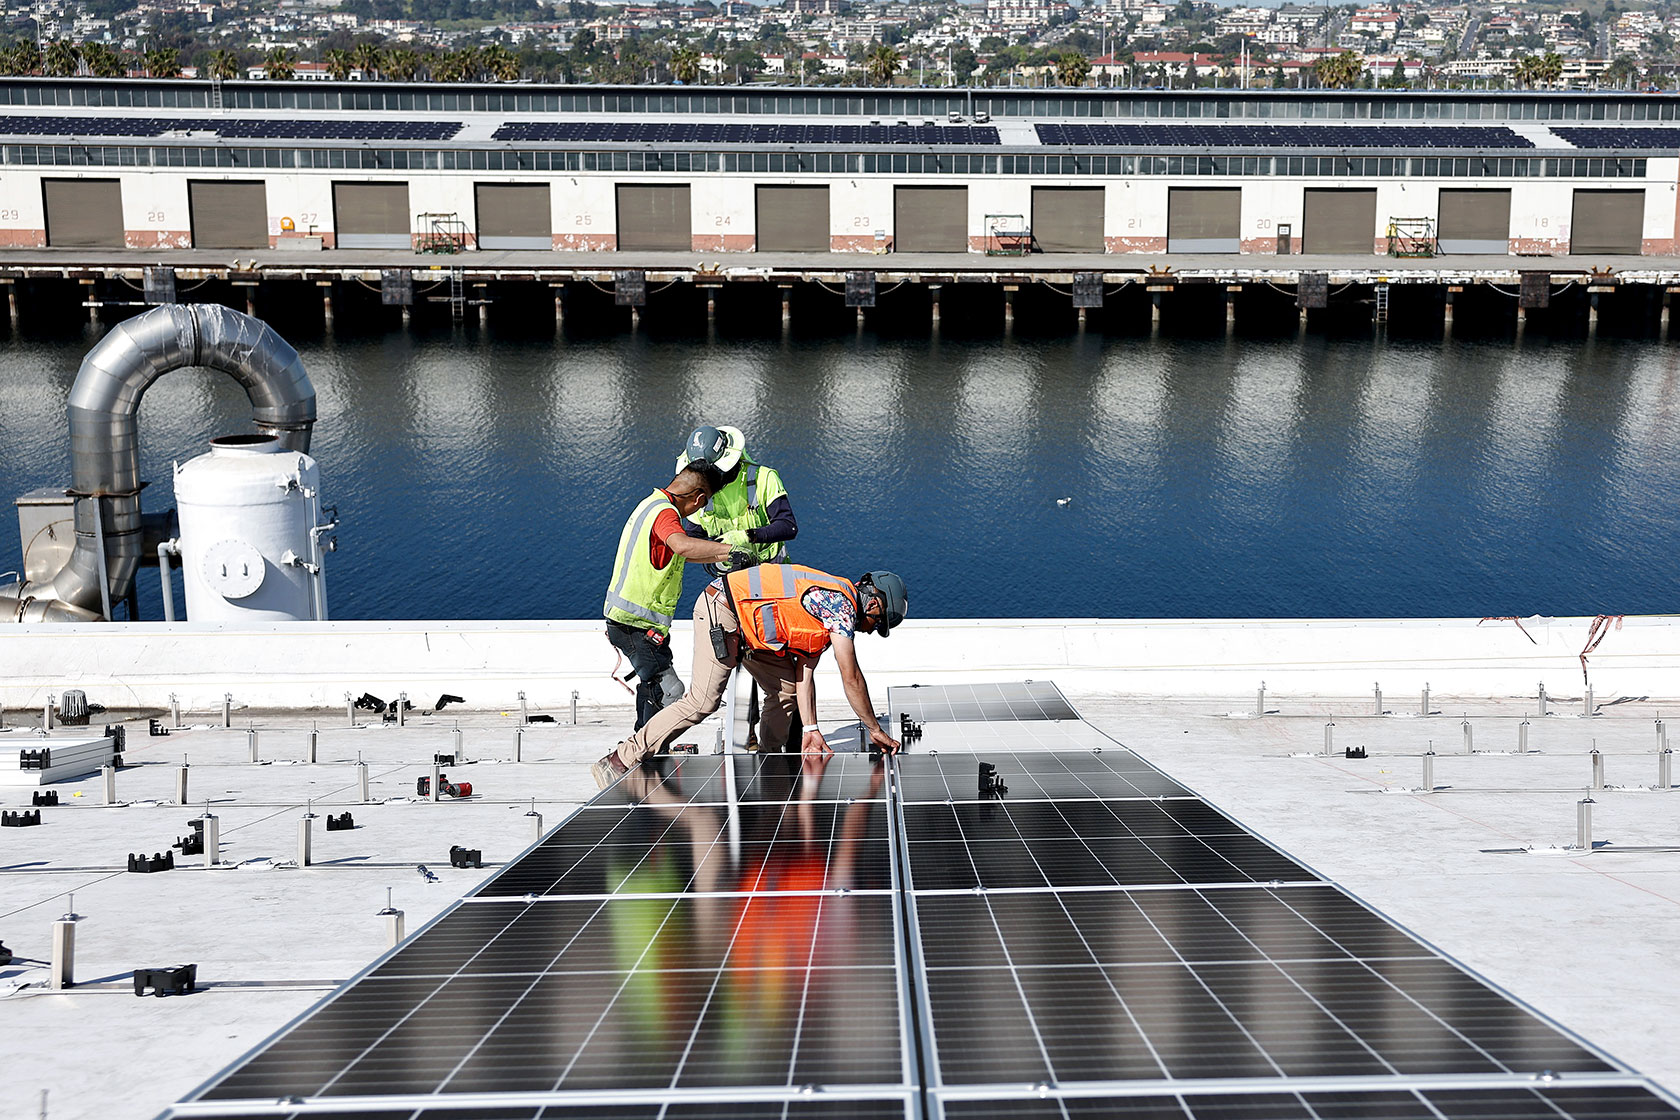 Photo shows two workers wearing bright clothing standing next to a few solar panels on a roof with a river in the background